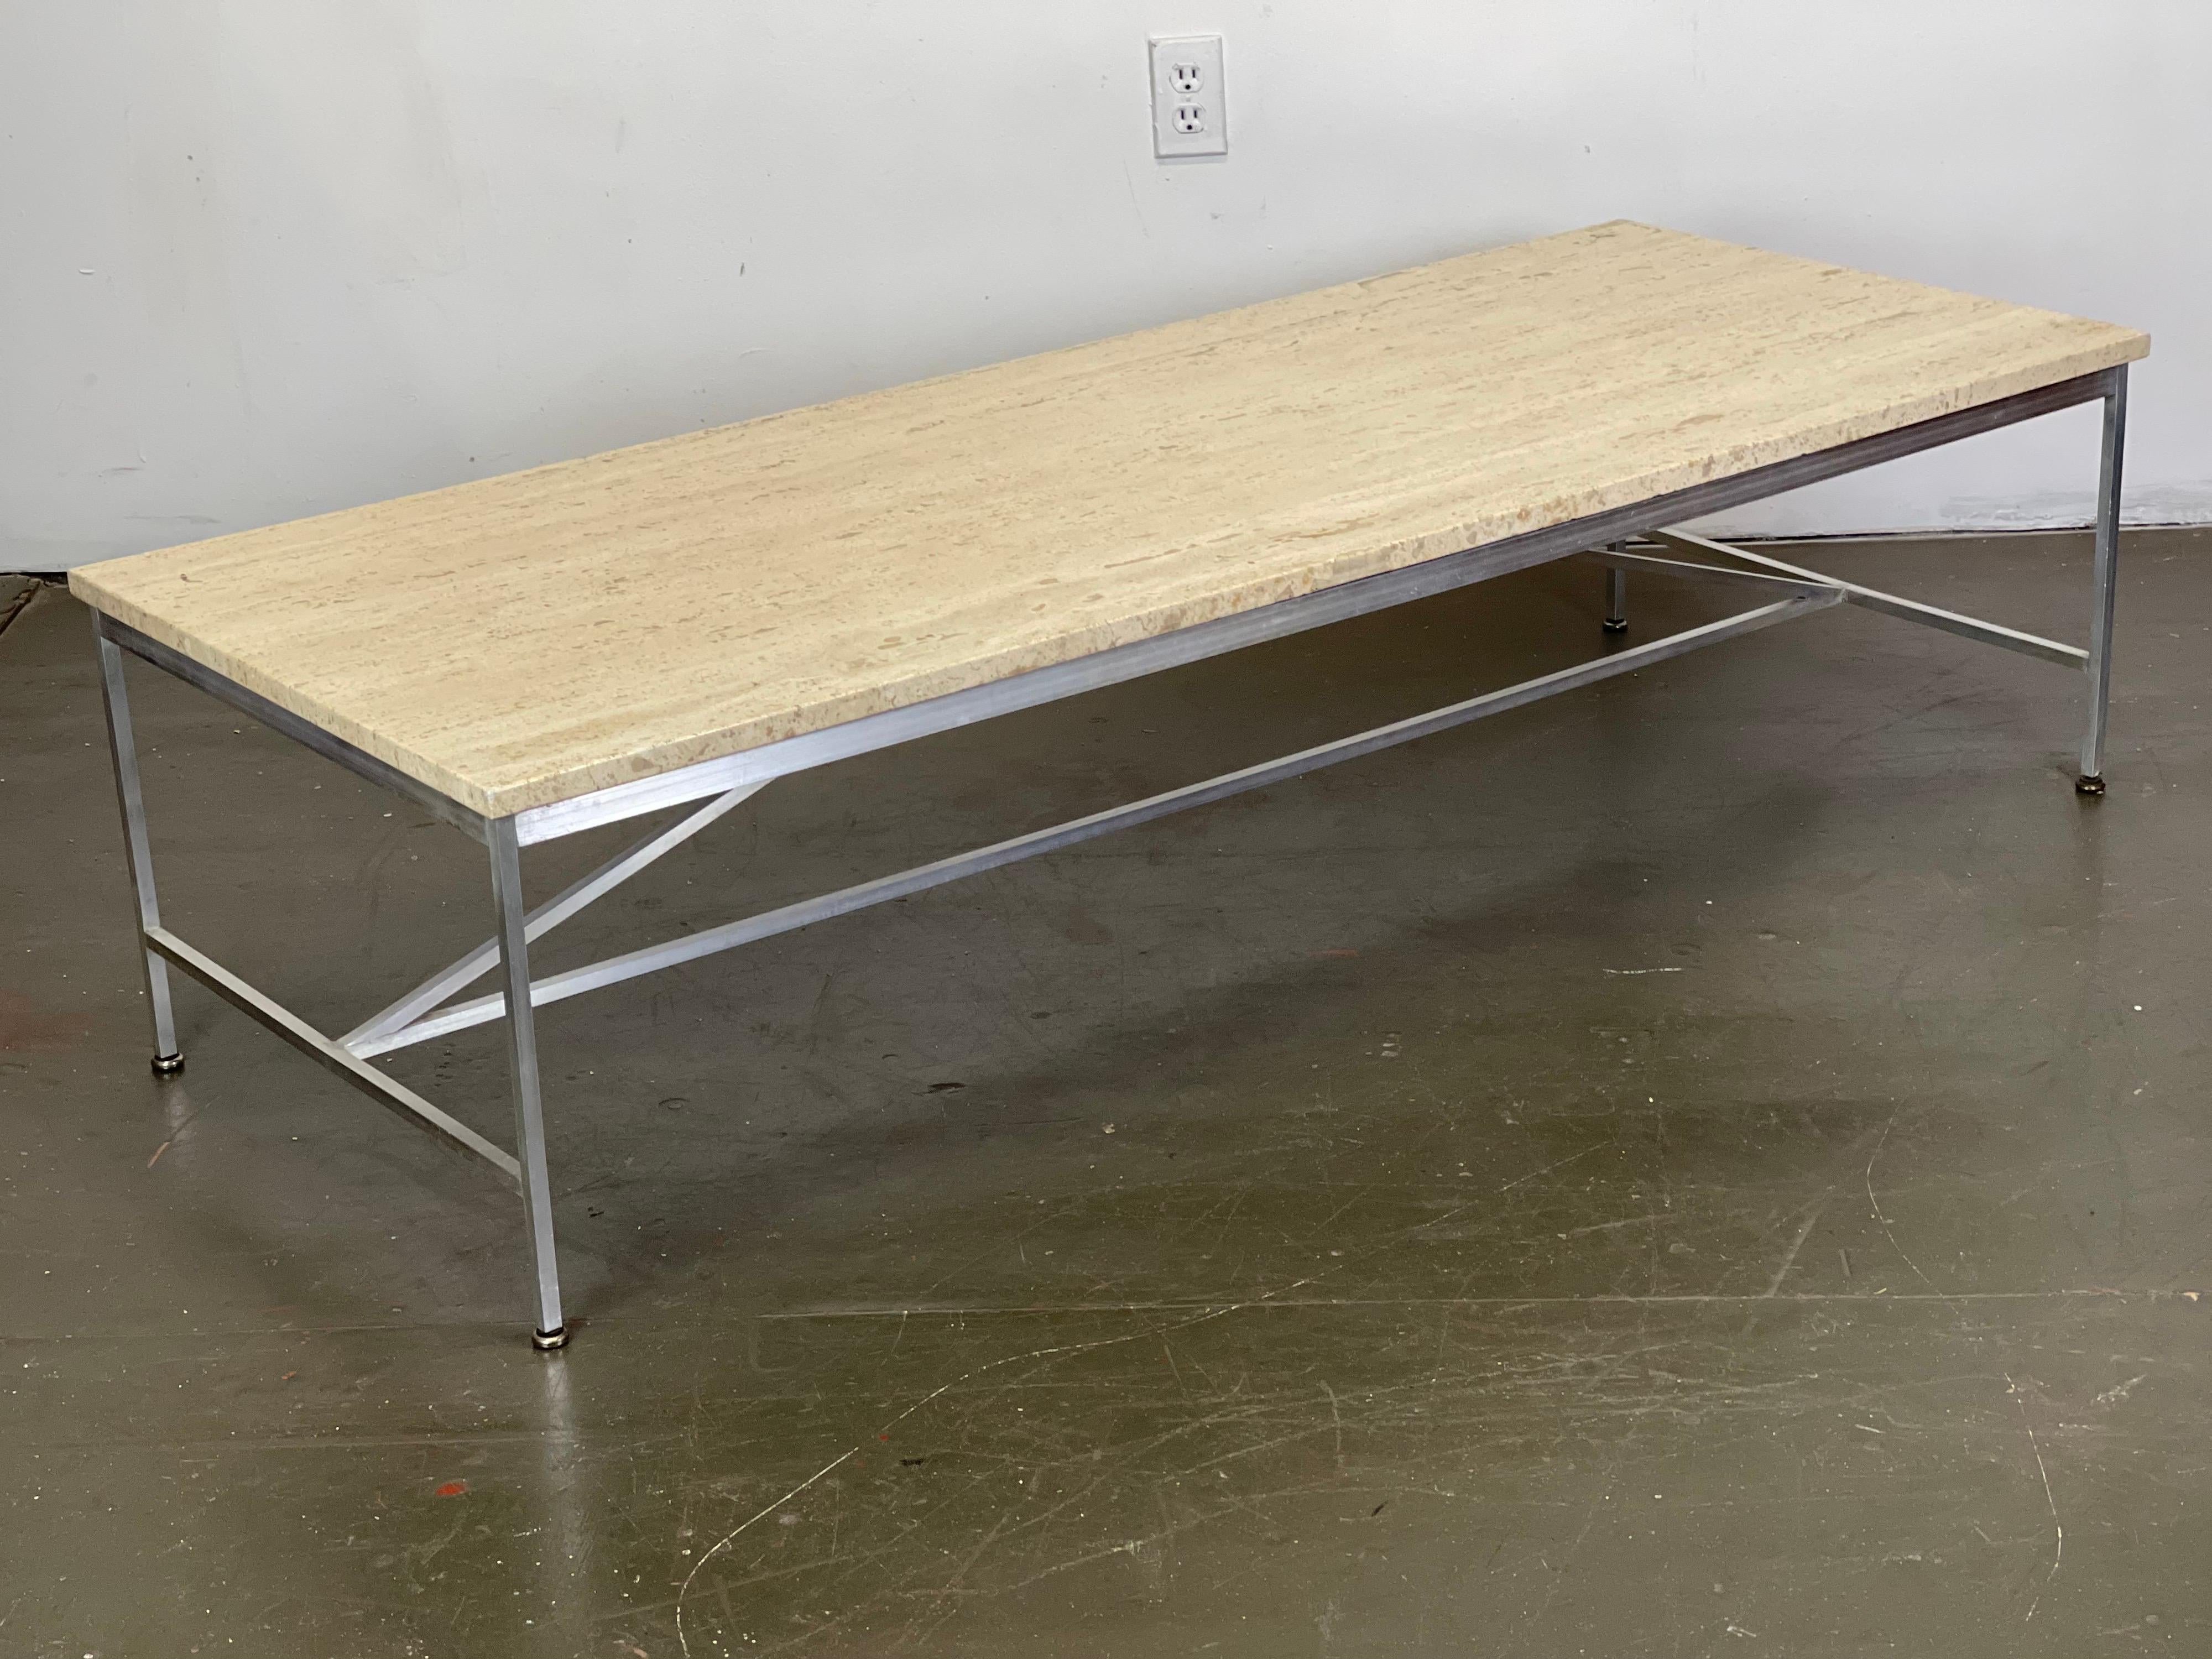 Sleek iconic Paul McCobb aluminum and travertine marble coffee table for Directional Furniture; Calvin Line. Aluminum was a special order option rather than the usual brass. Original condition - light scuffs and wear. Original feet glides. Model